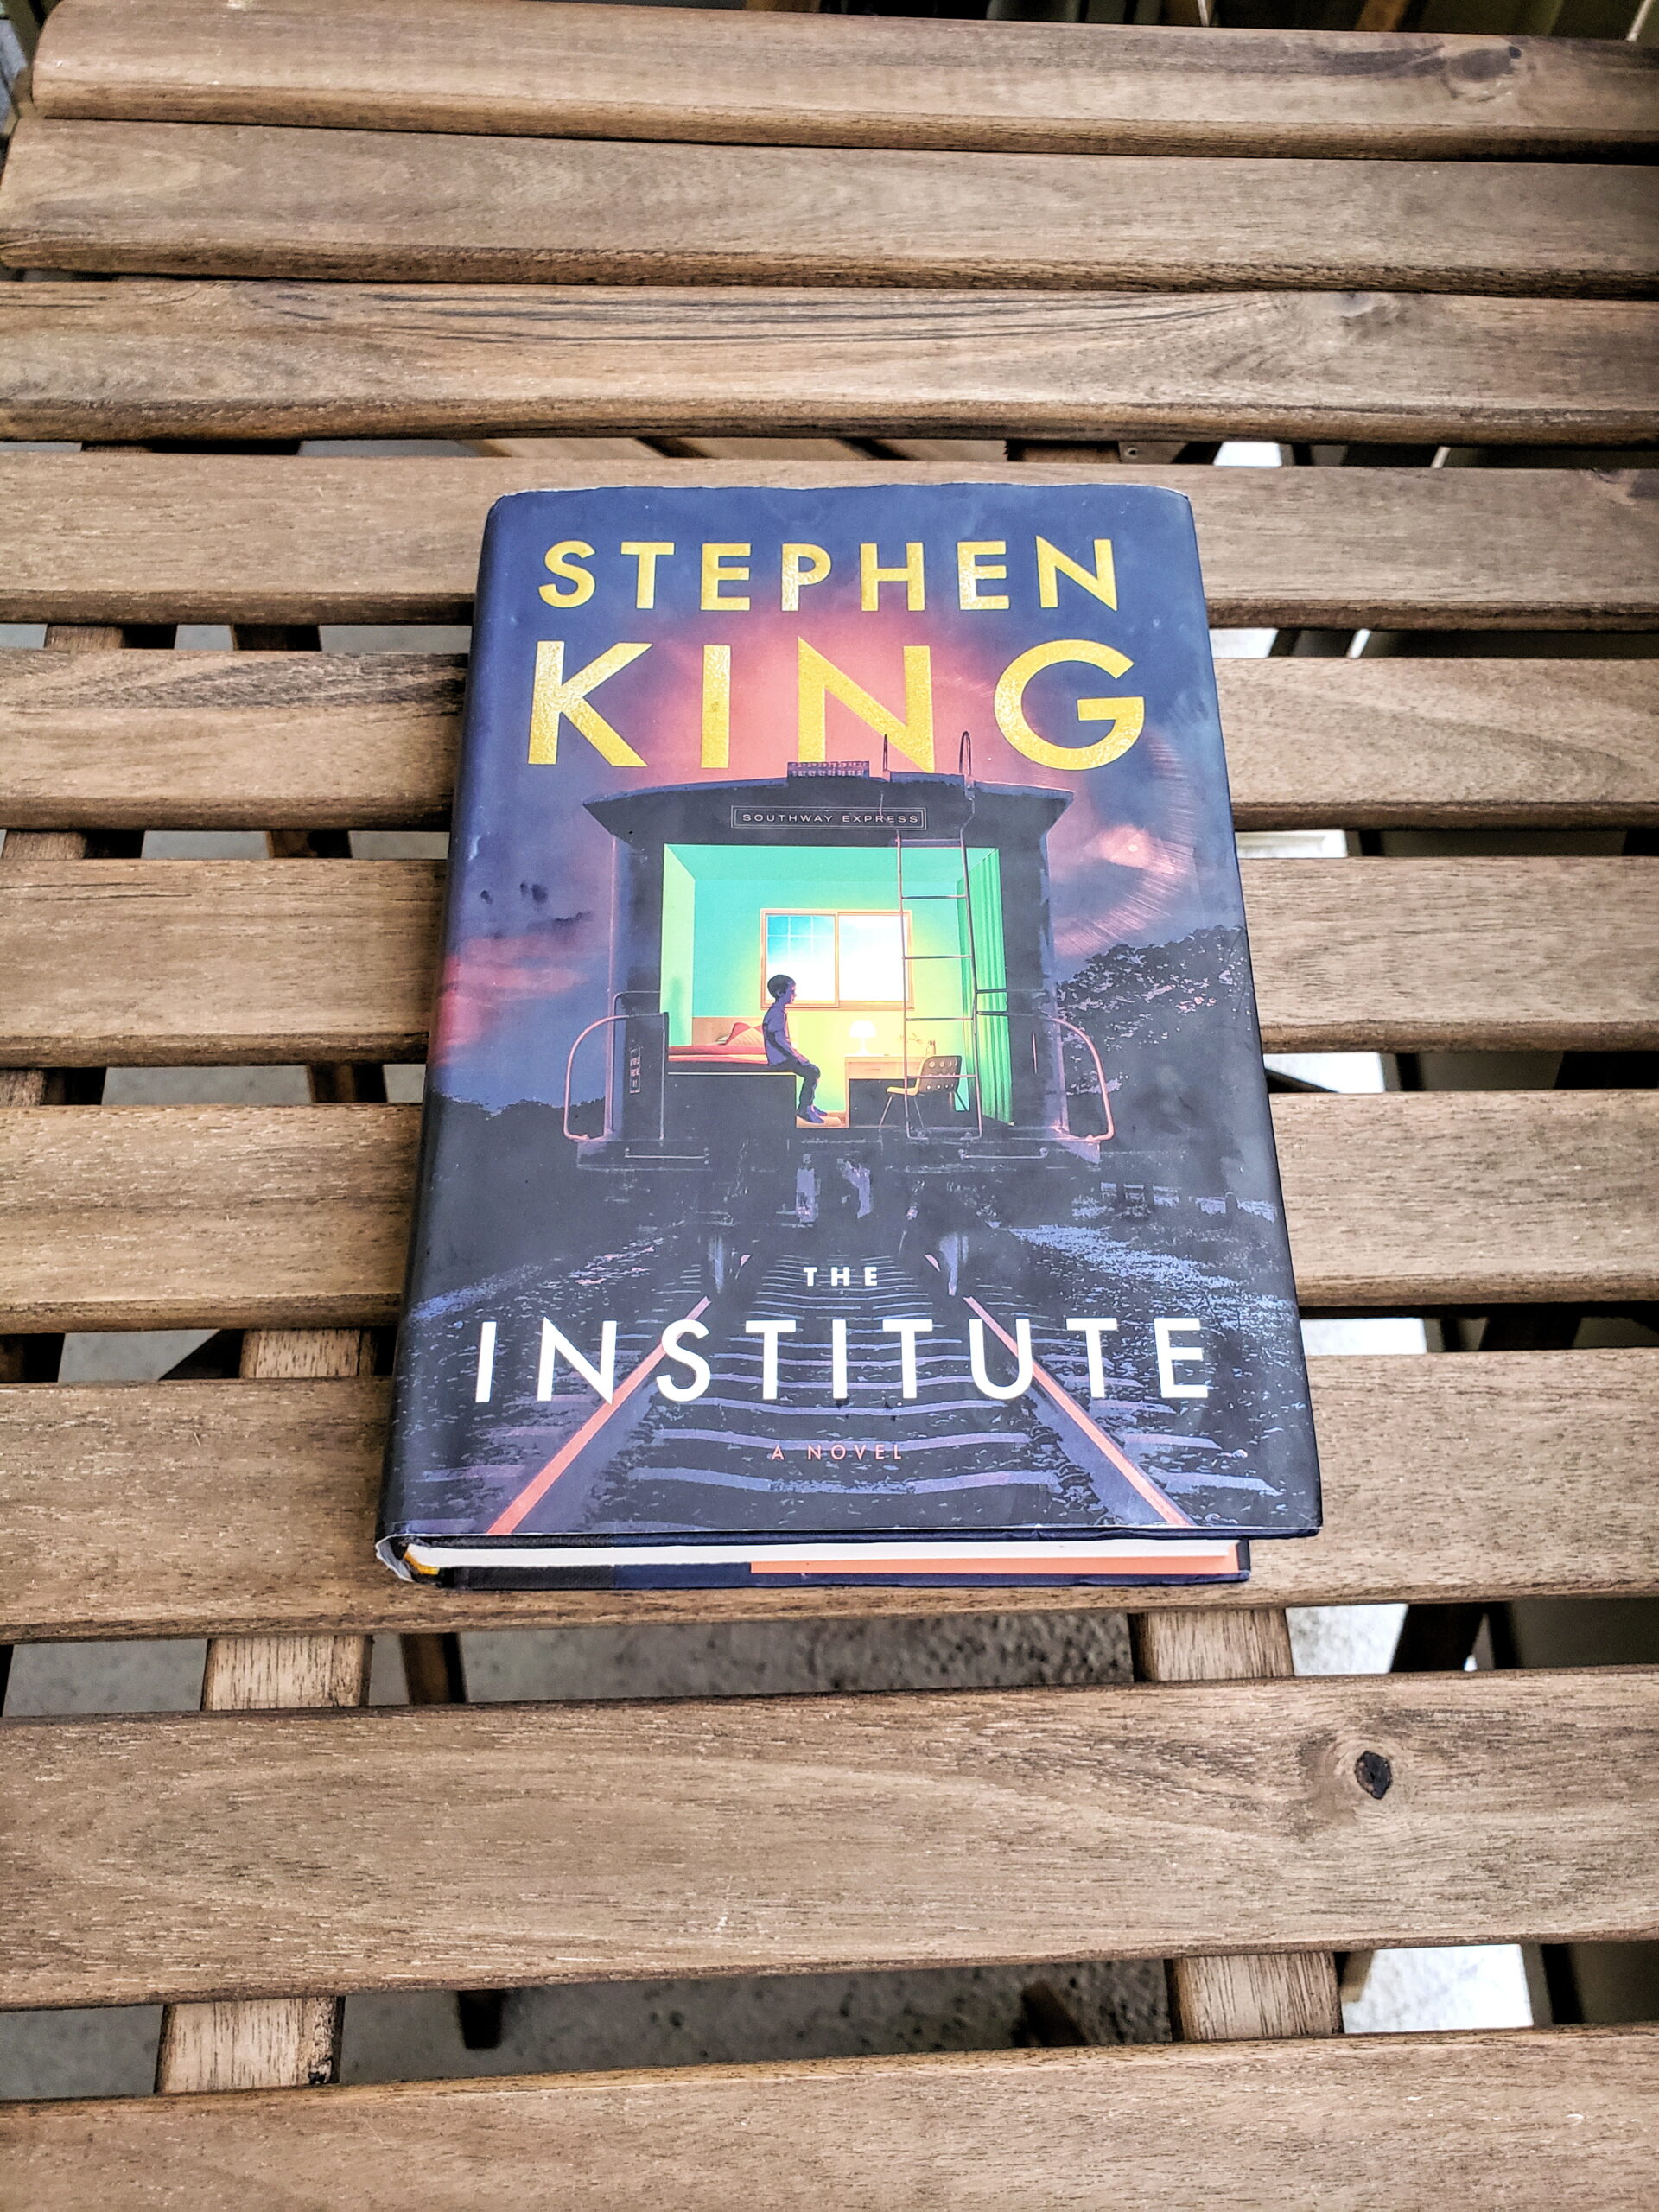 34: The Institute by Stephen King